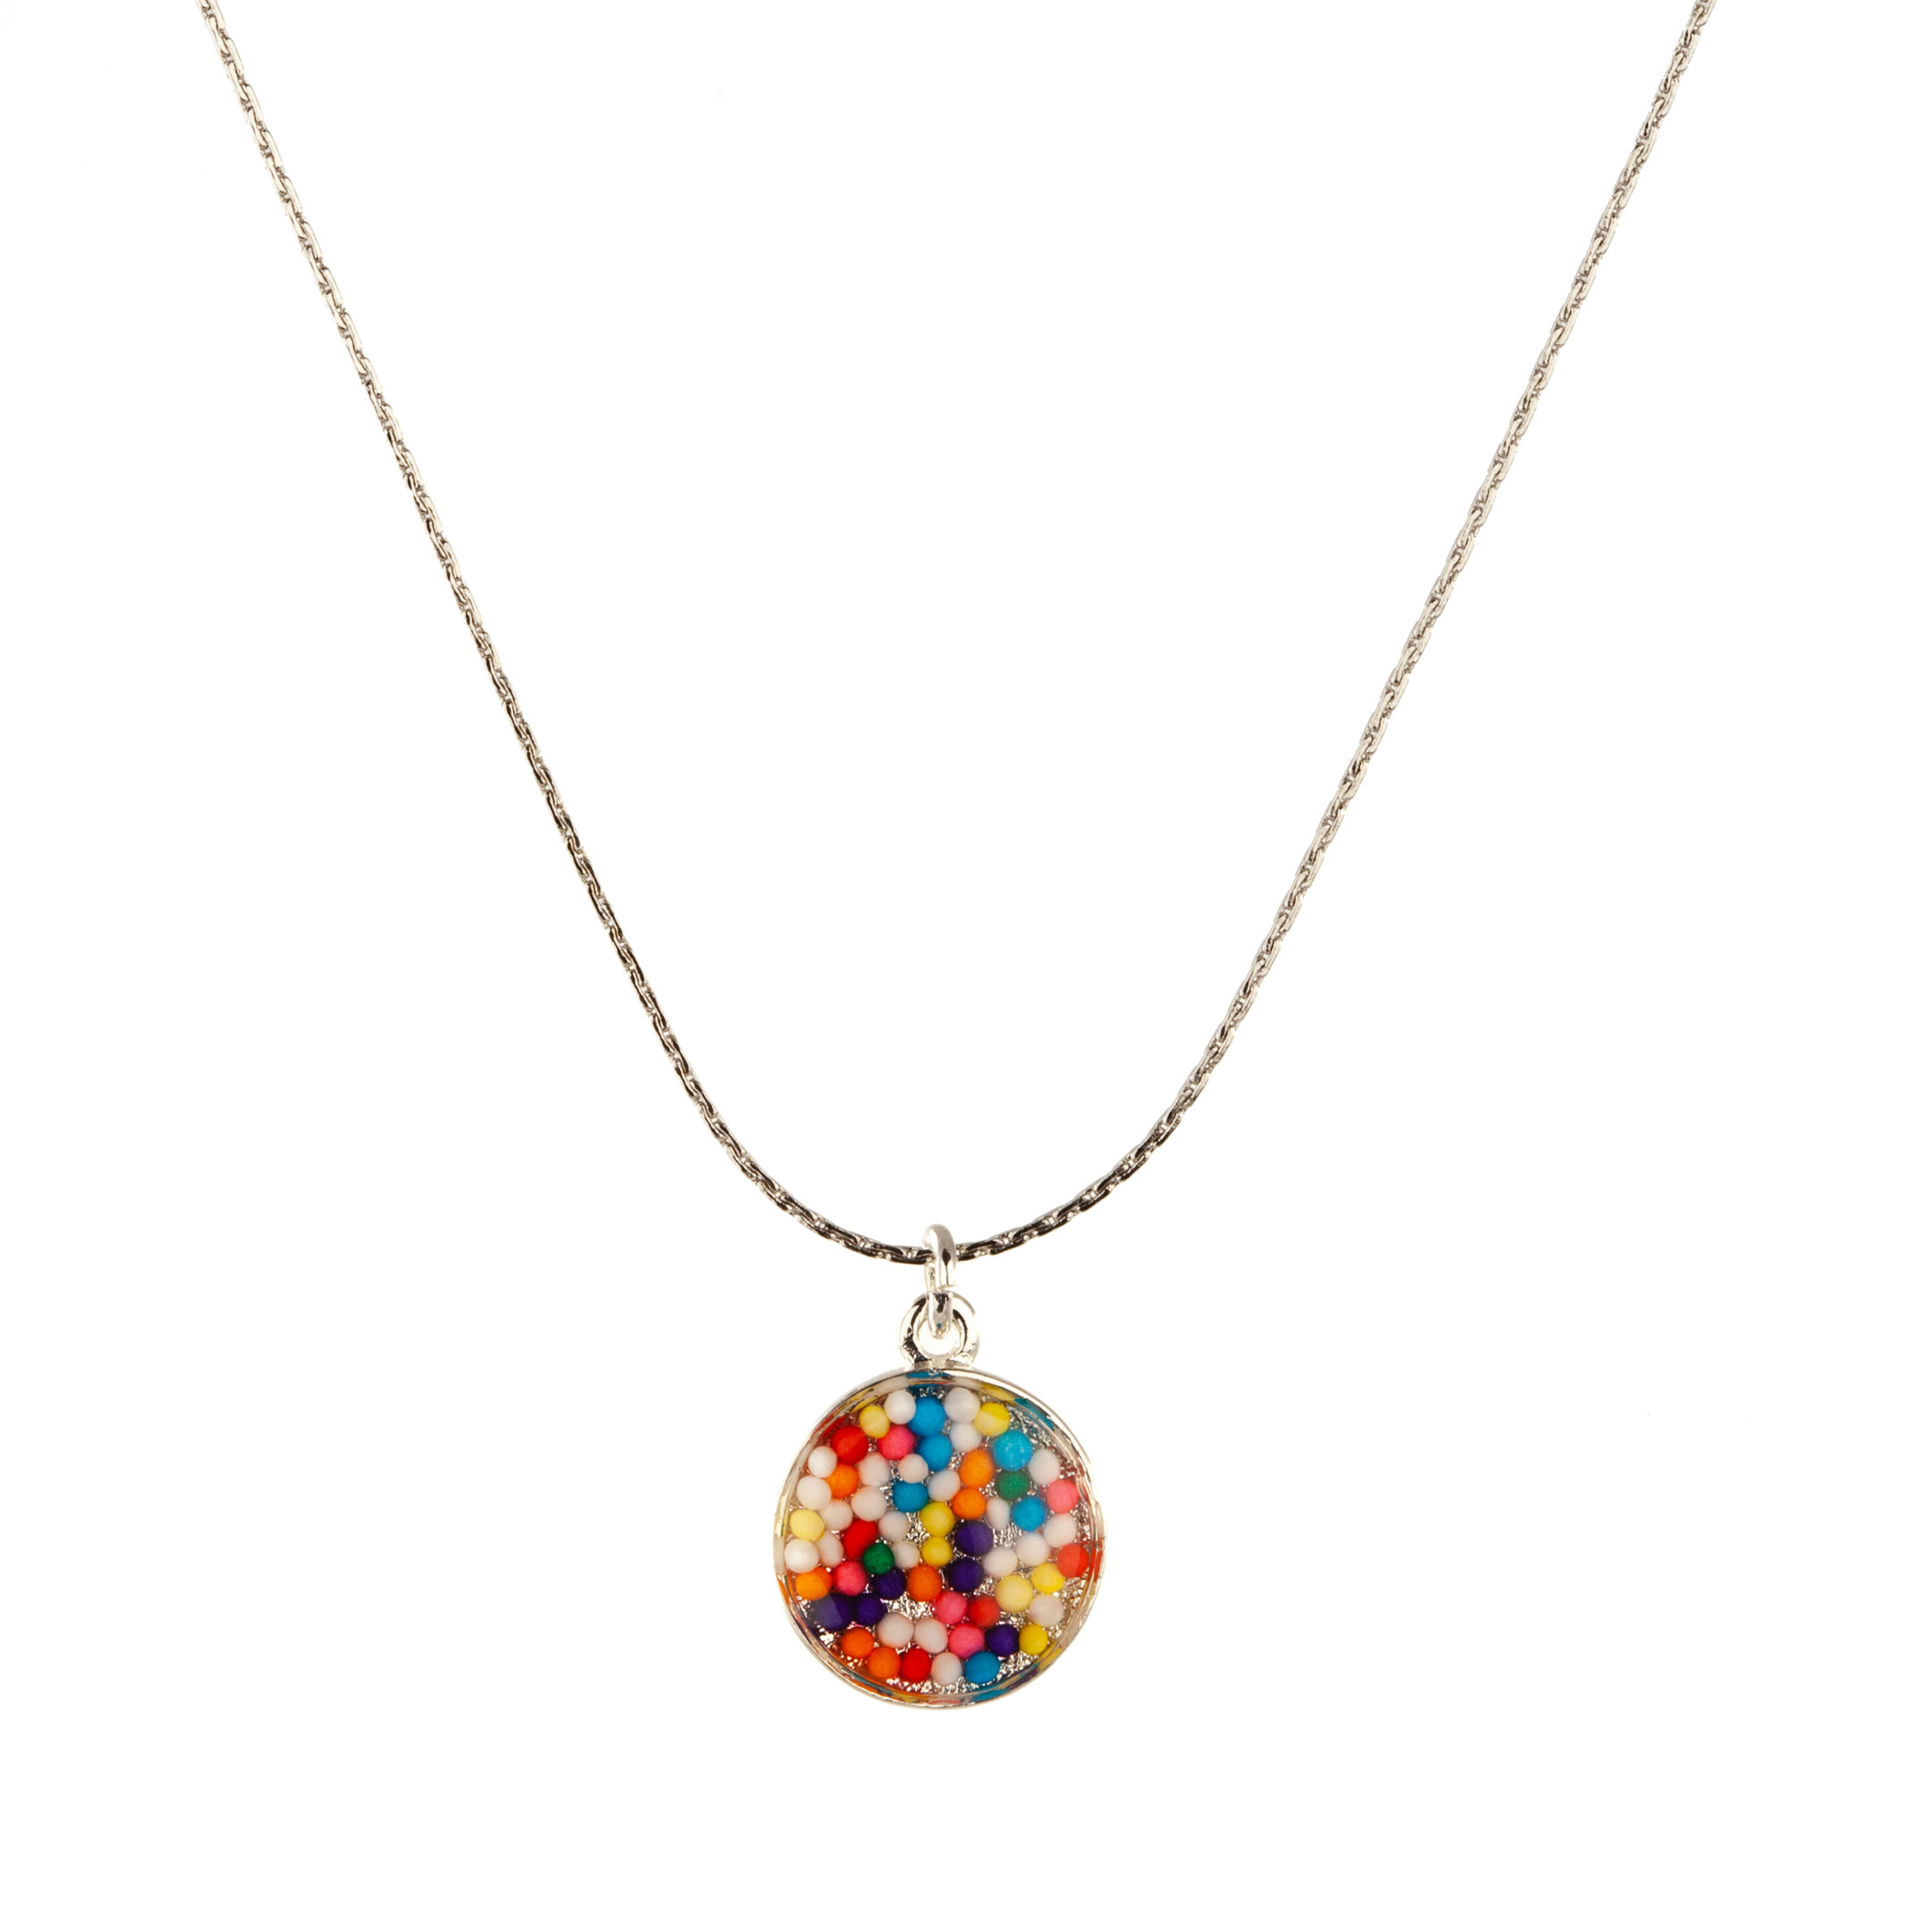 Another item in the December Eat Drink Lucky box as an add on is the Sprinkles necklace